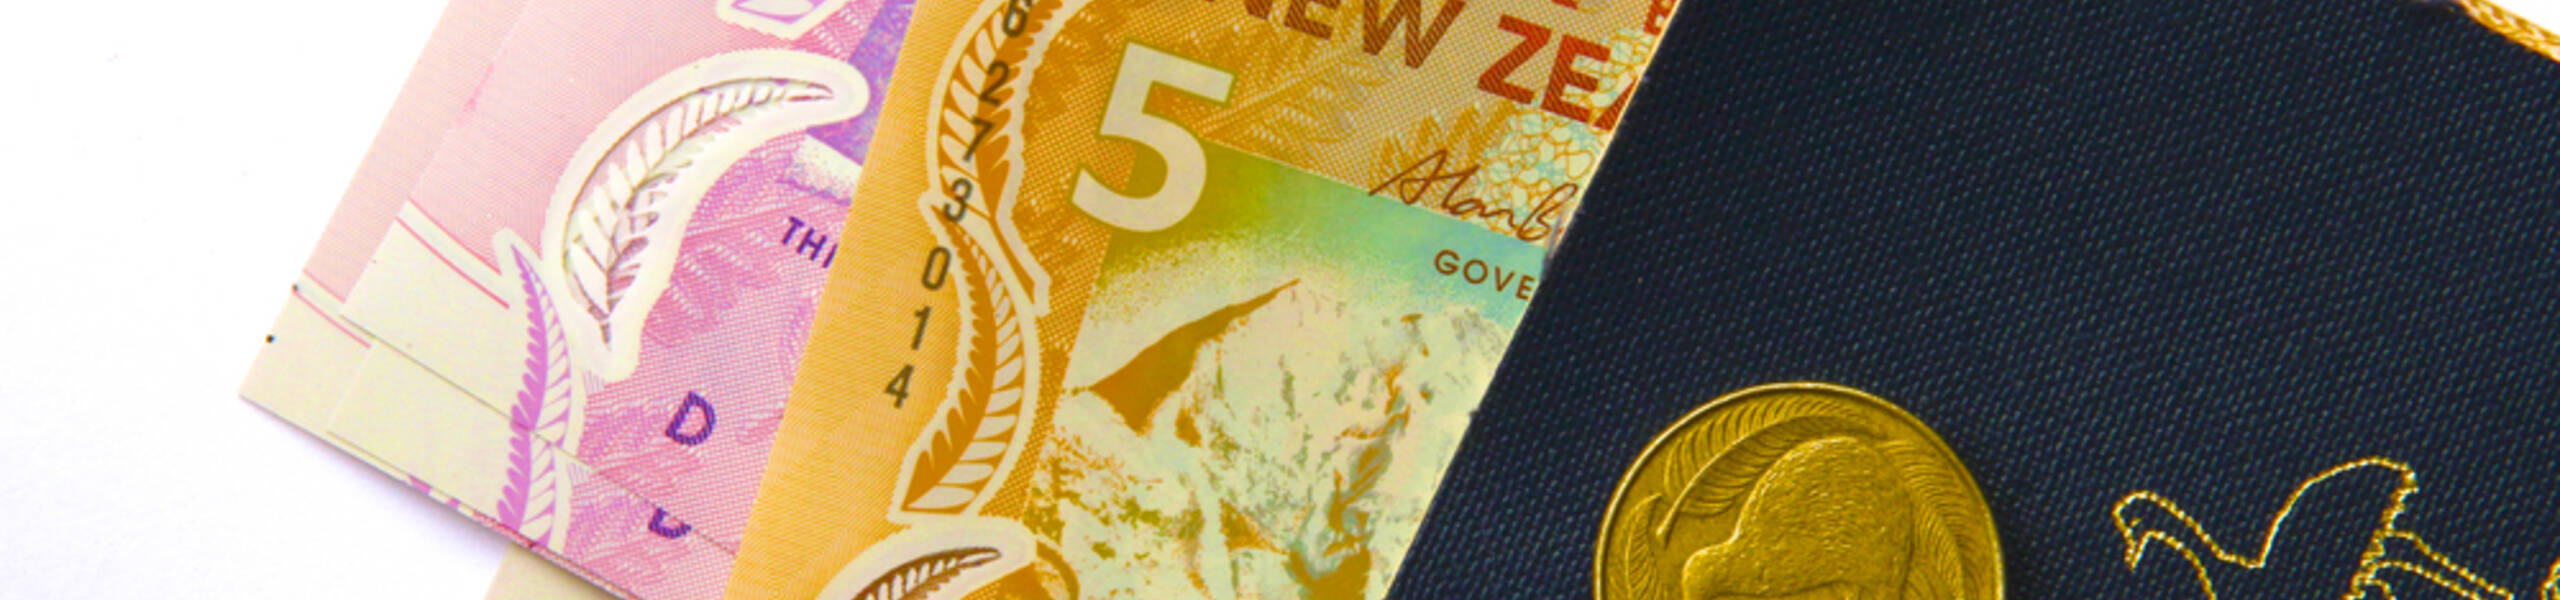 AUD vs. NZD: checking the strengths